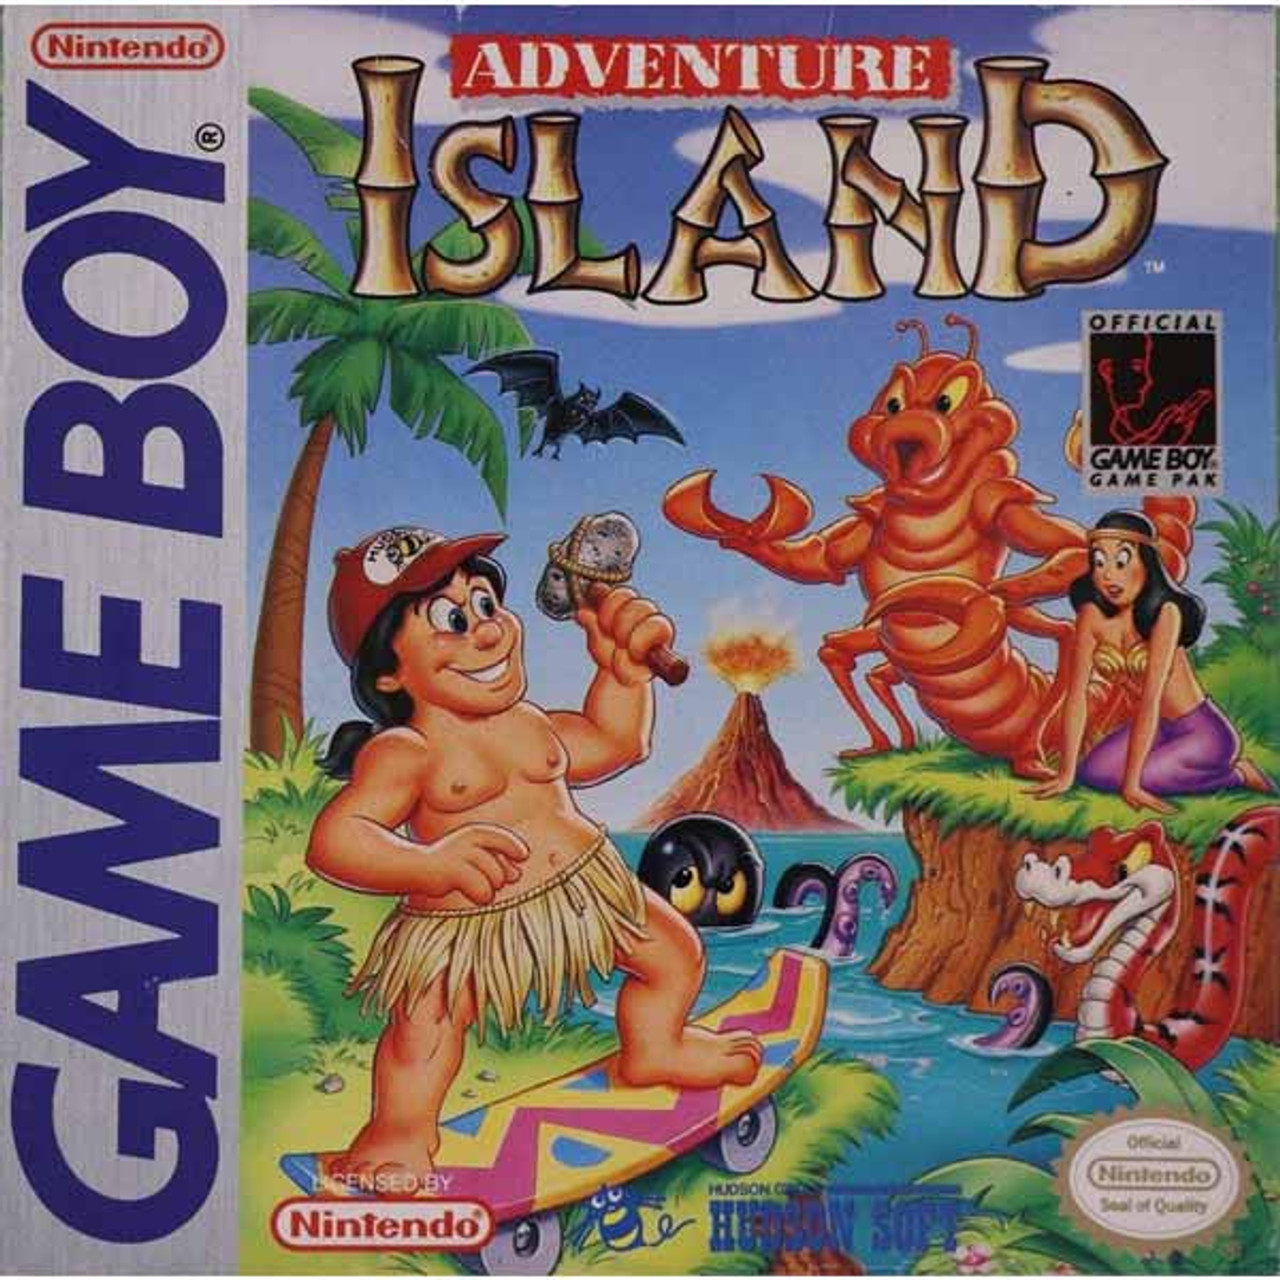 Adventure Island  Box My Games! Reproduction game boxes